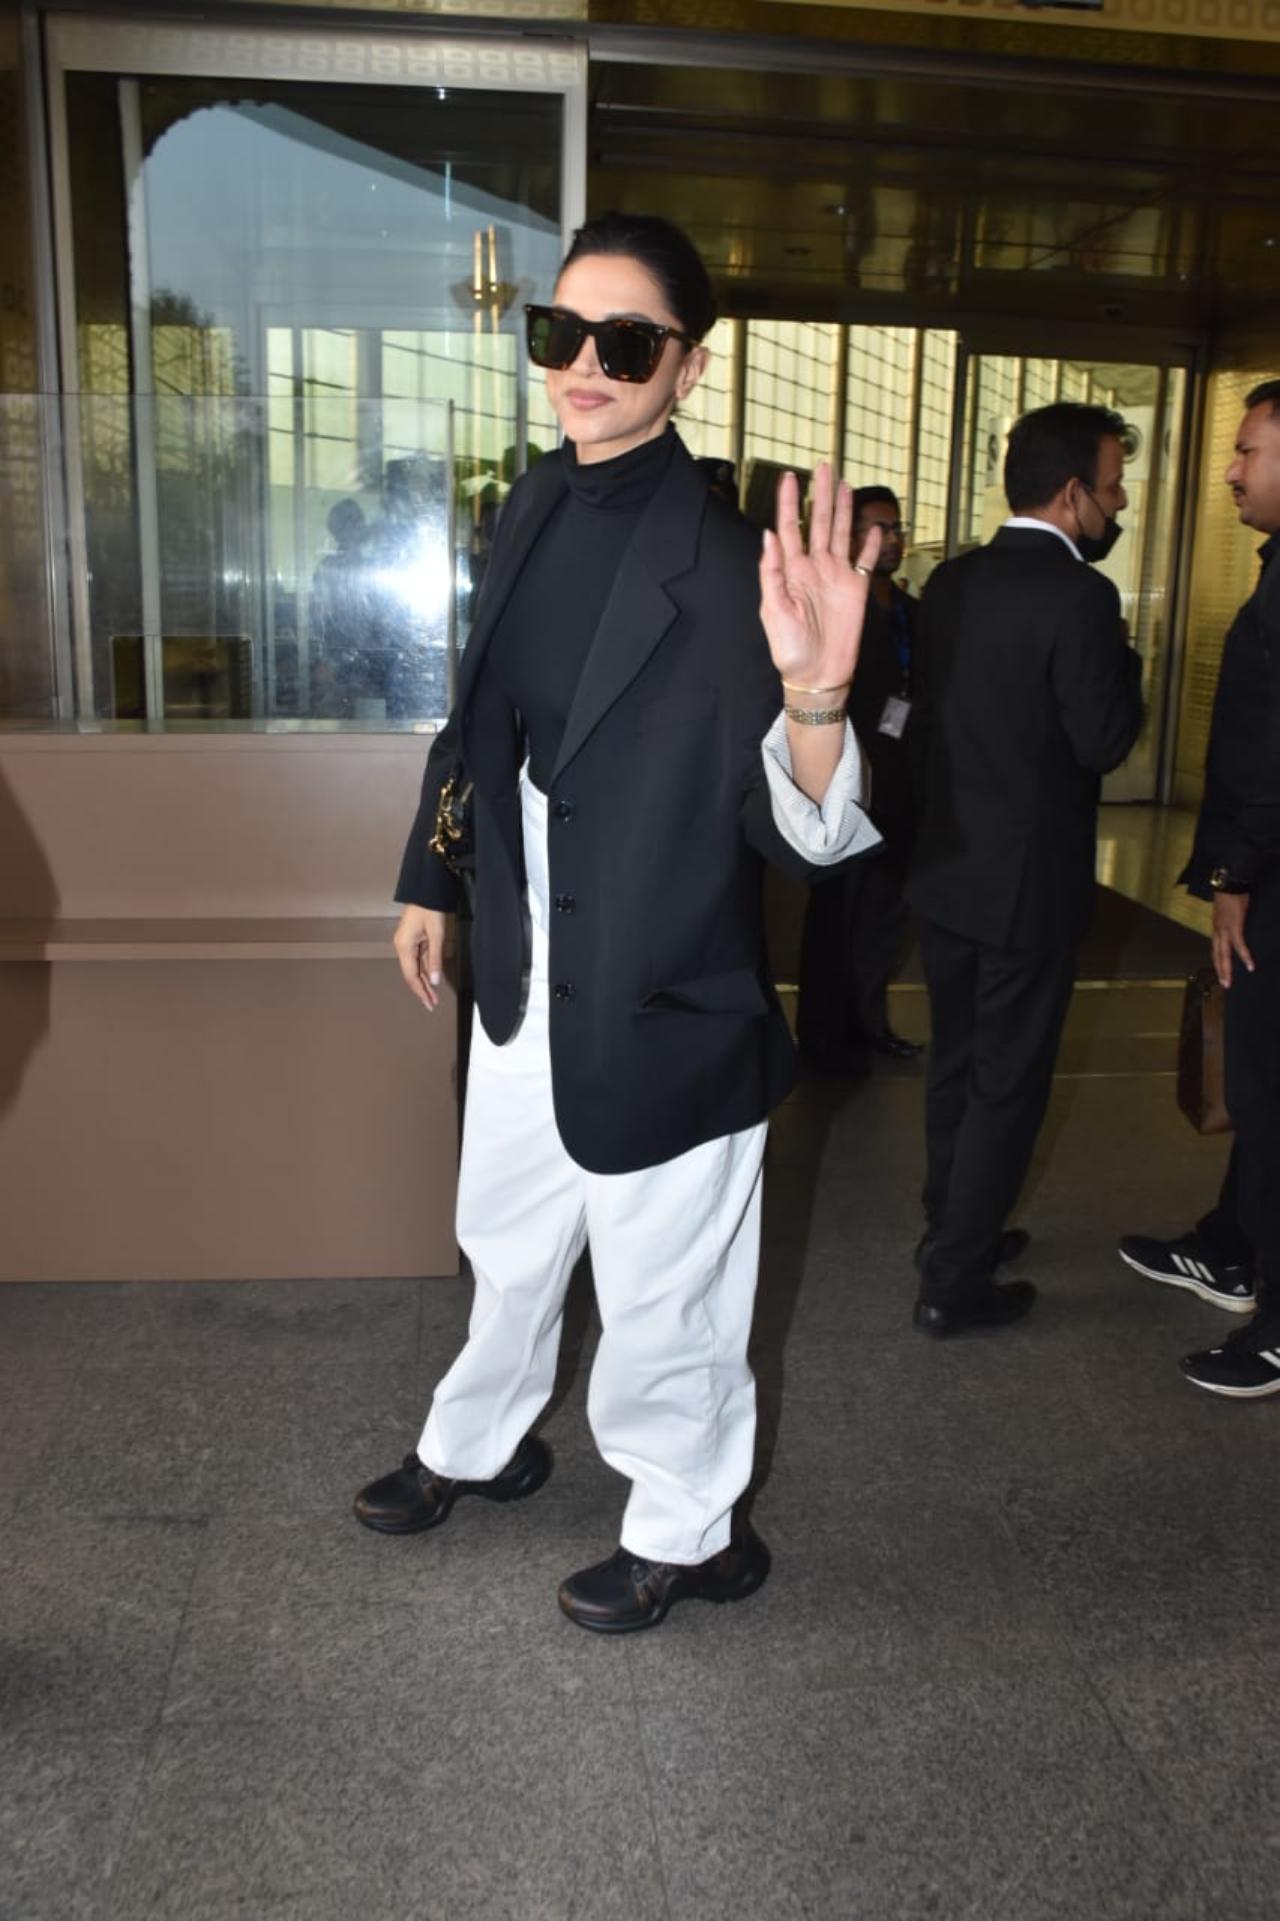 The 'Piku' actor slayed in the lady-boss look as she donned a black turtleneck paired up with an oversized black blazer. She matched her outfit with white sweatpants and accessorized her look with black sunglasses and combat boots